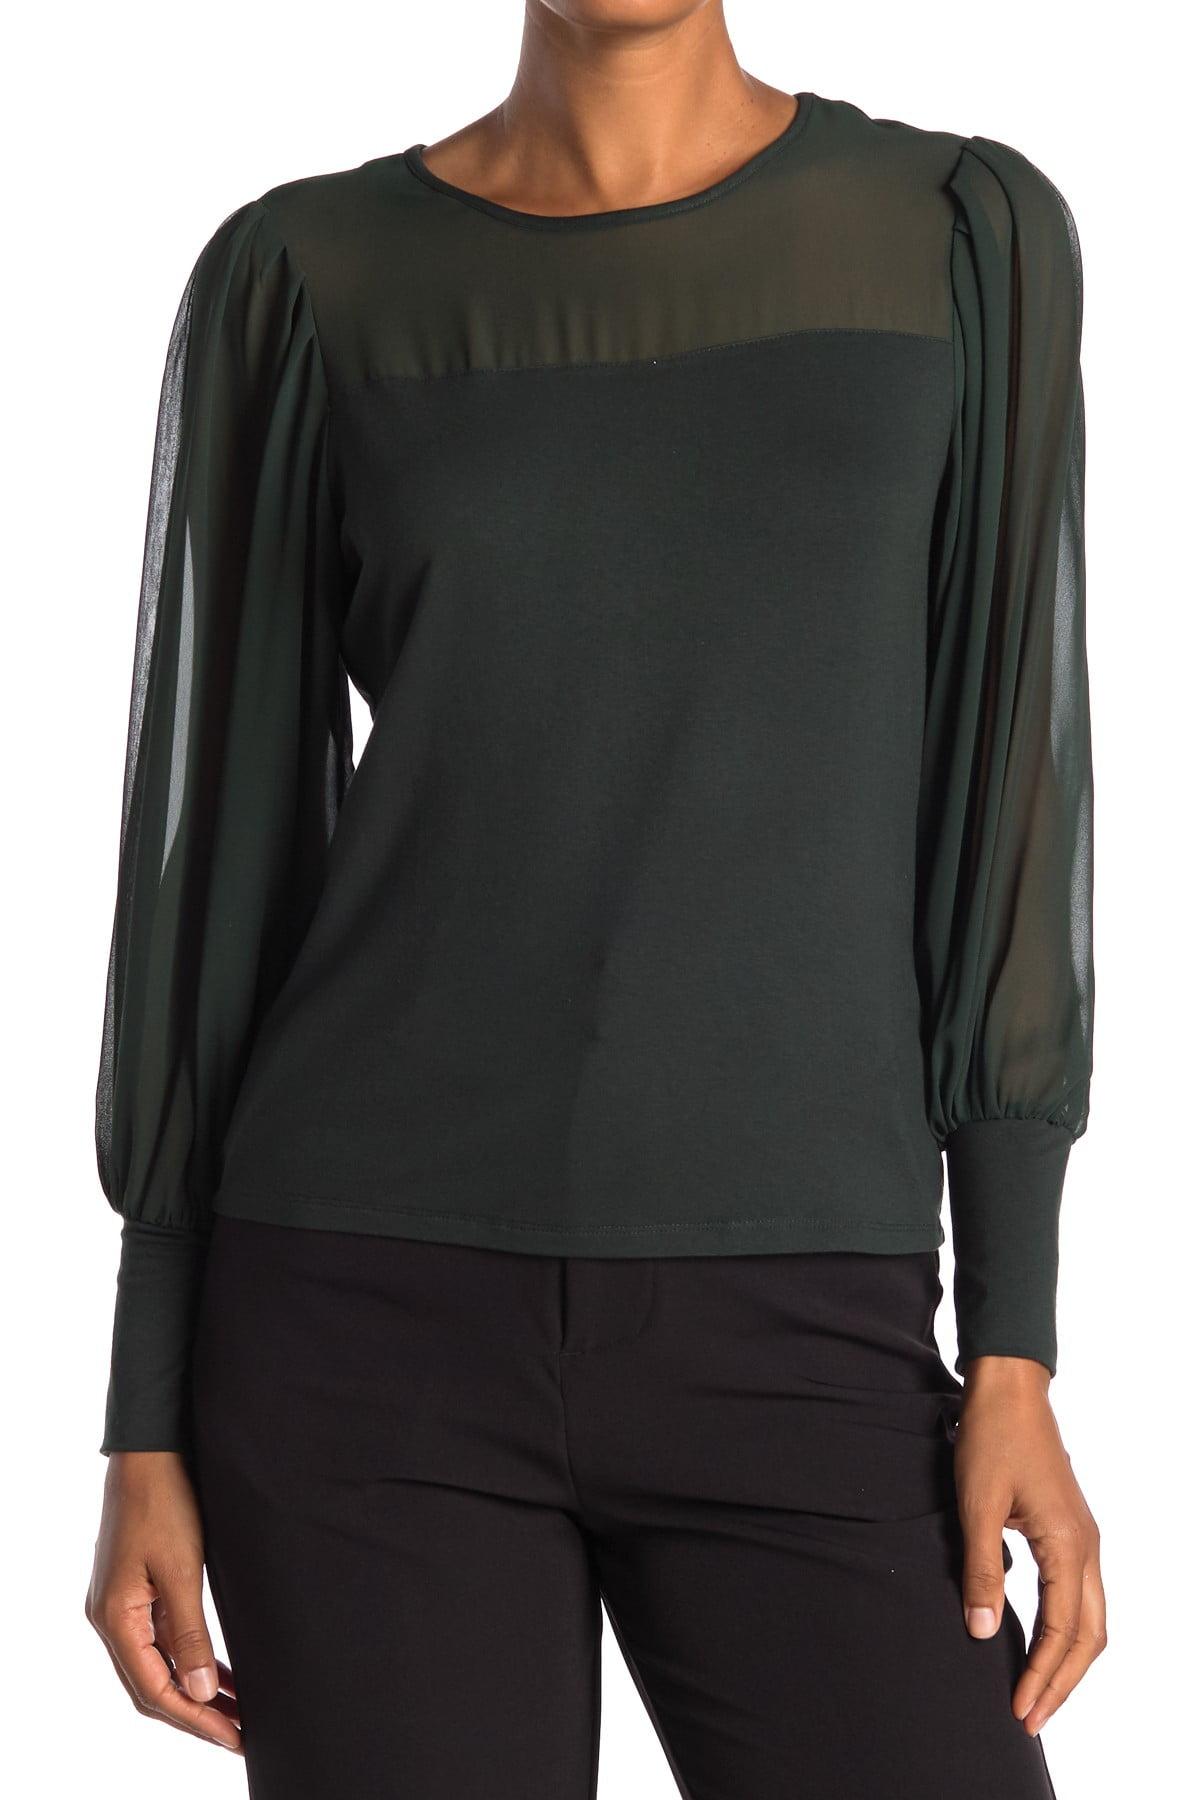 Vince Camuto Mixed Media Chiffon Long Sleeve Blouse in Black | Lyst